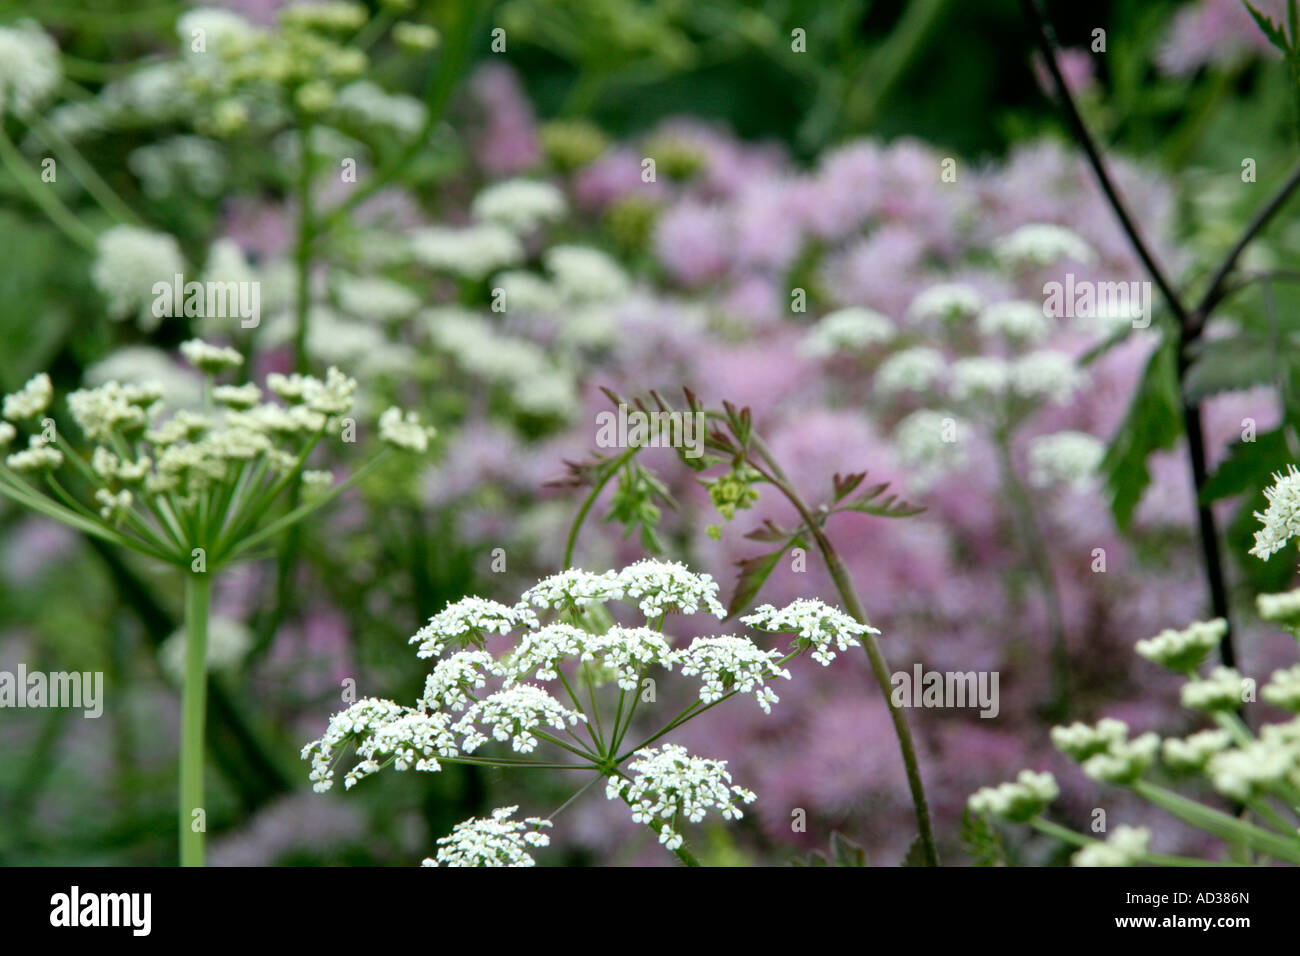 Anthriscus sylvestris with the candyfloss puffs of Thalictrum aquilegiafolium and umbels of Oenanthe crocata Stock Photo